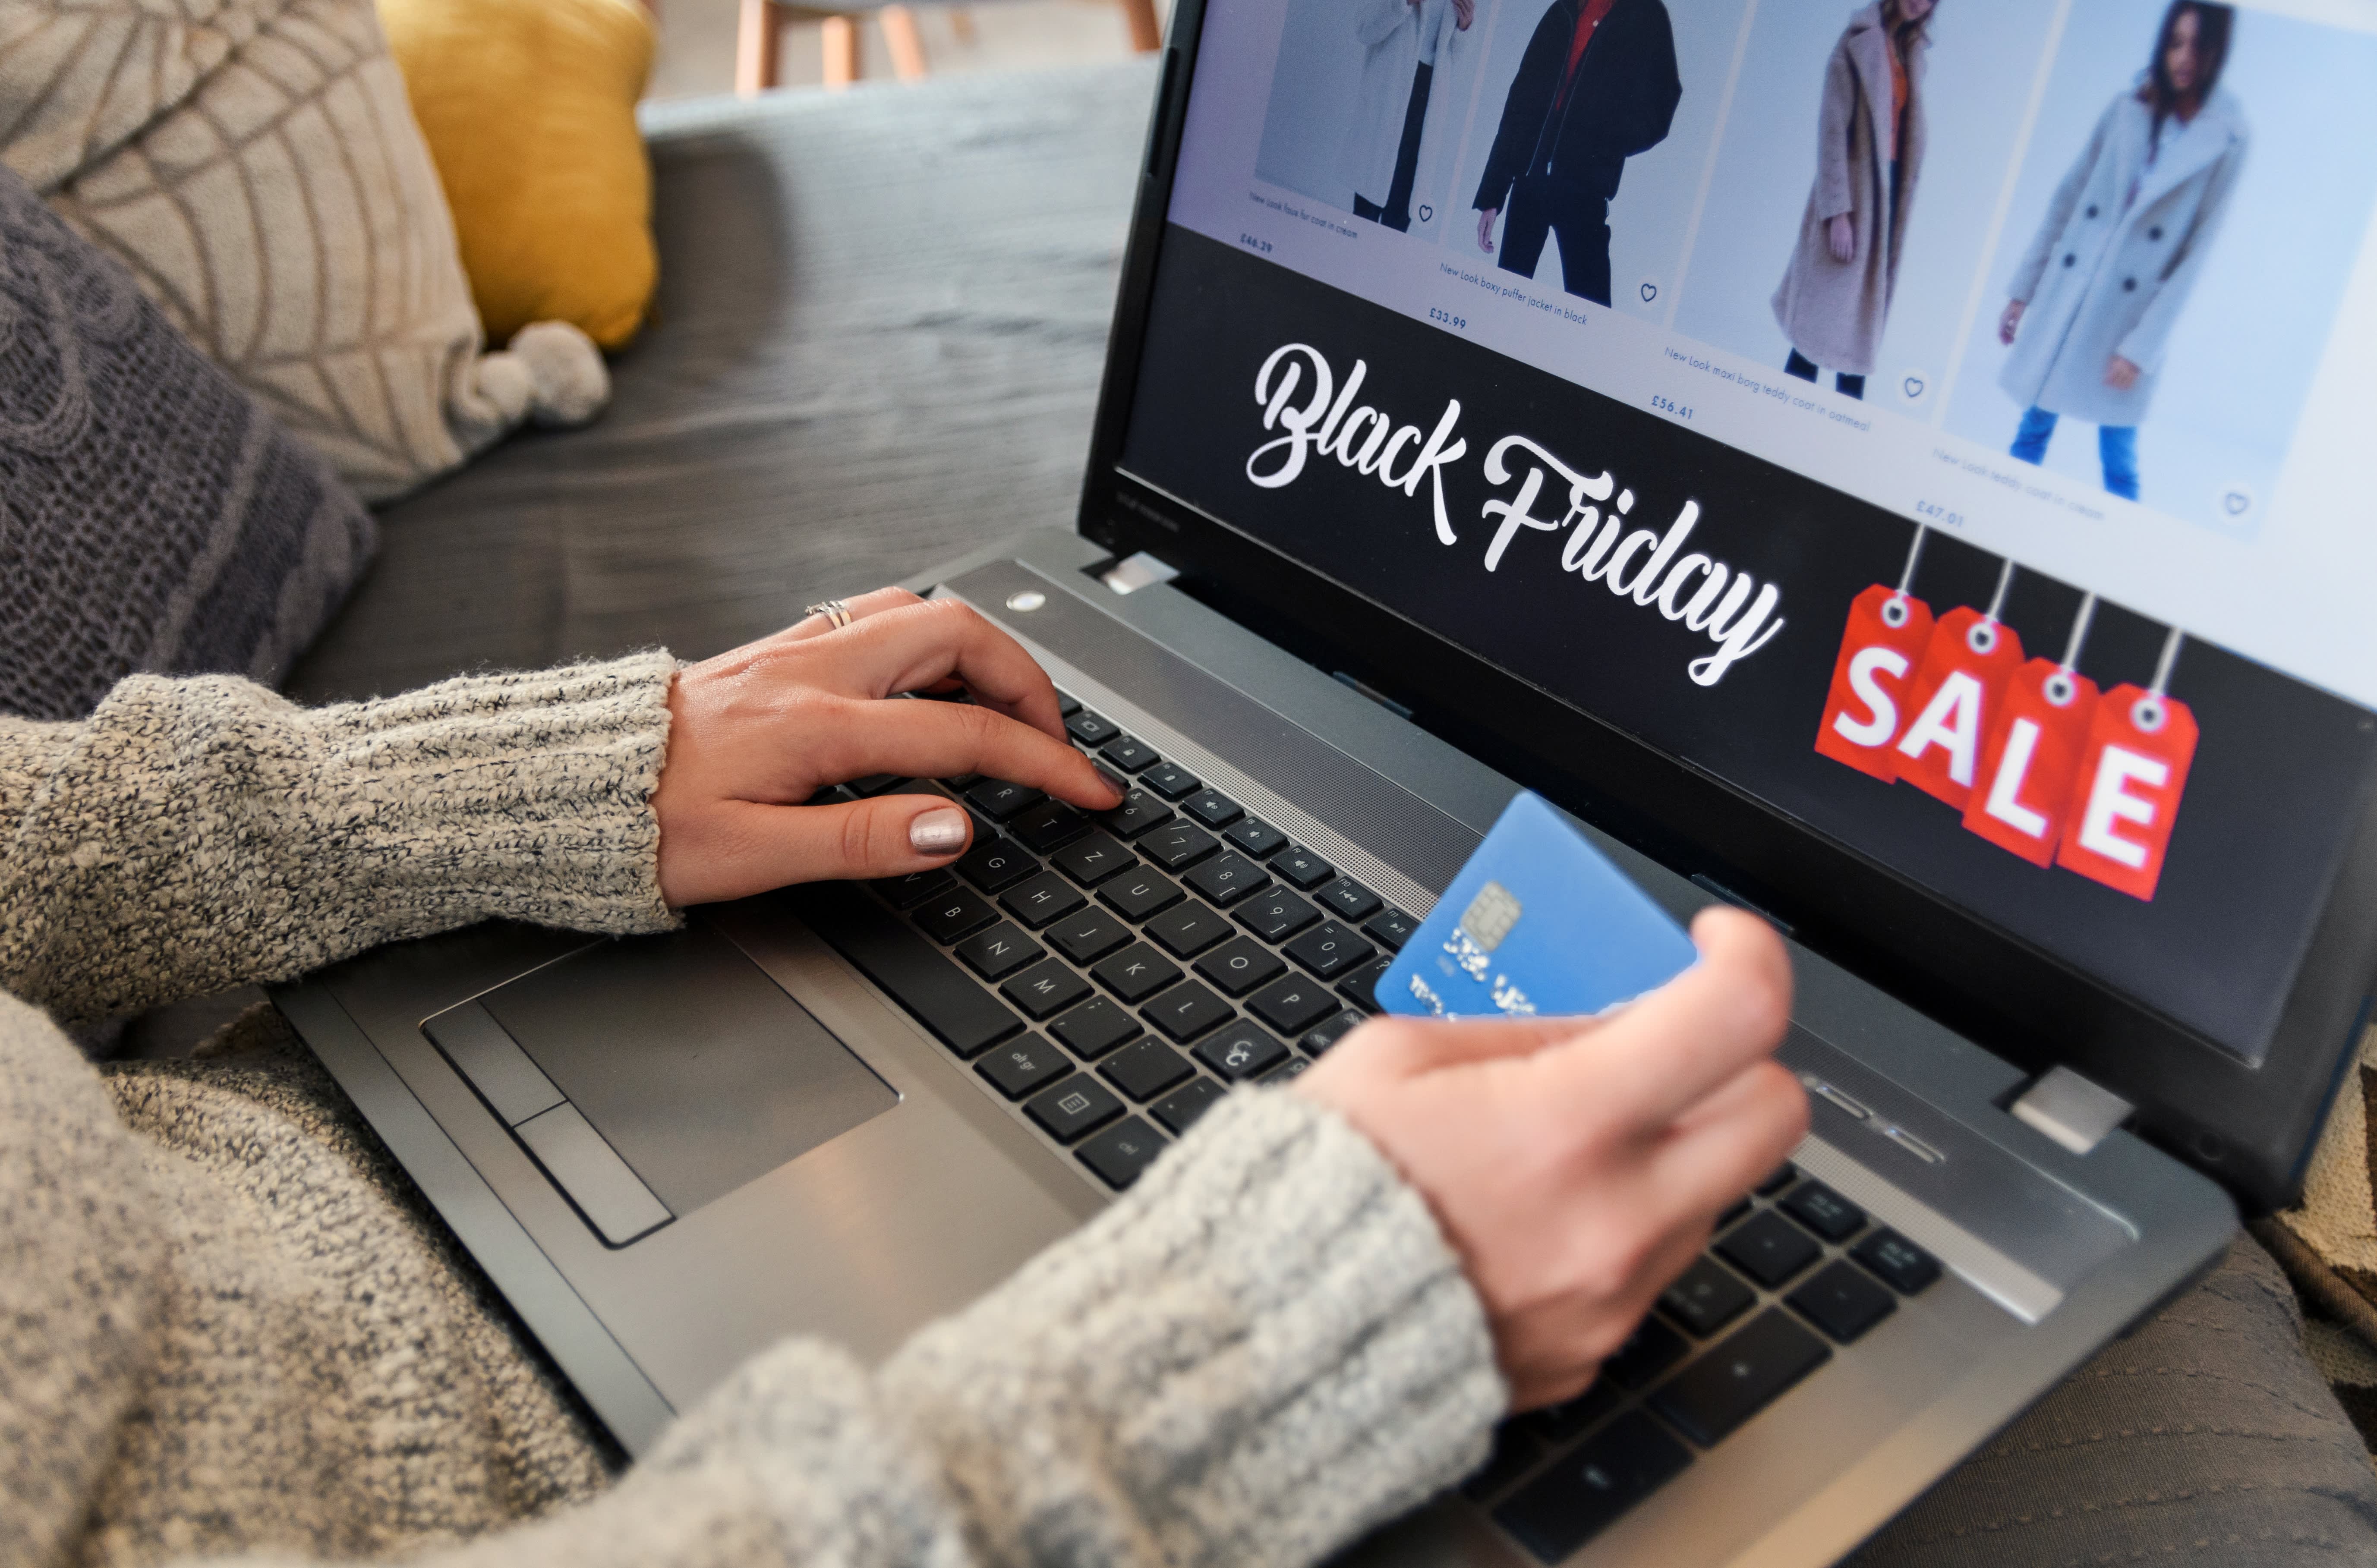 Black Friday shopping guide: You can find discounts of 'up to 90% off&...